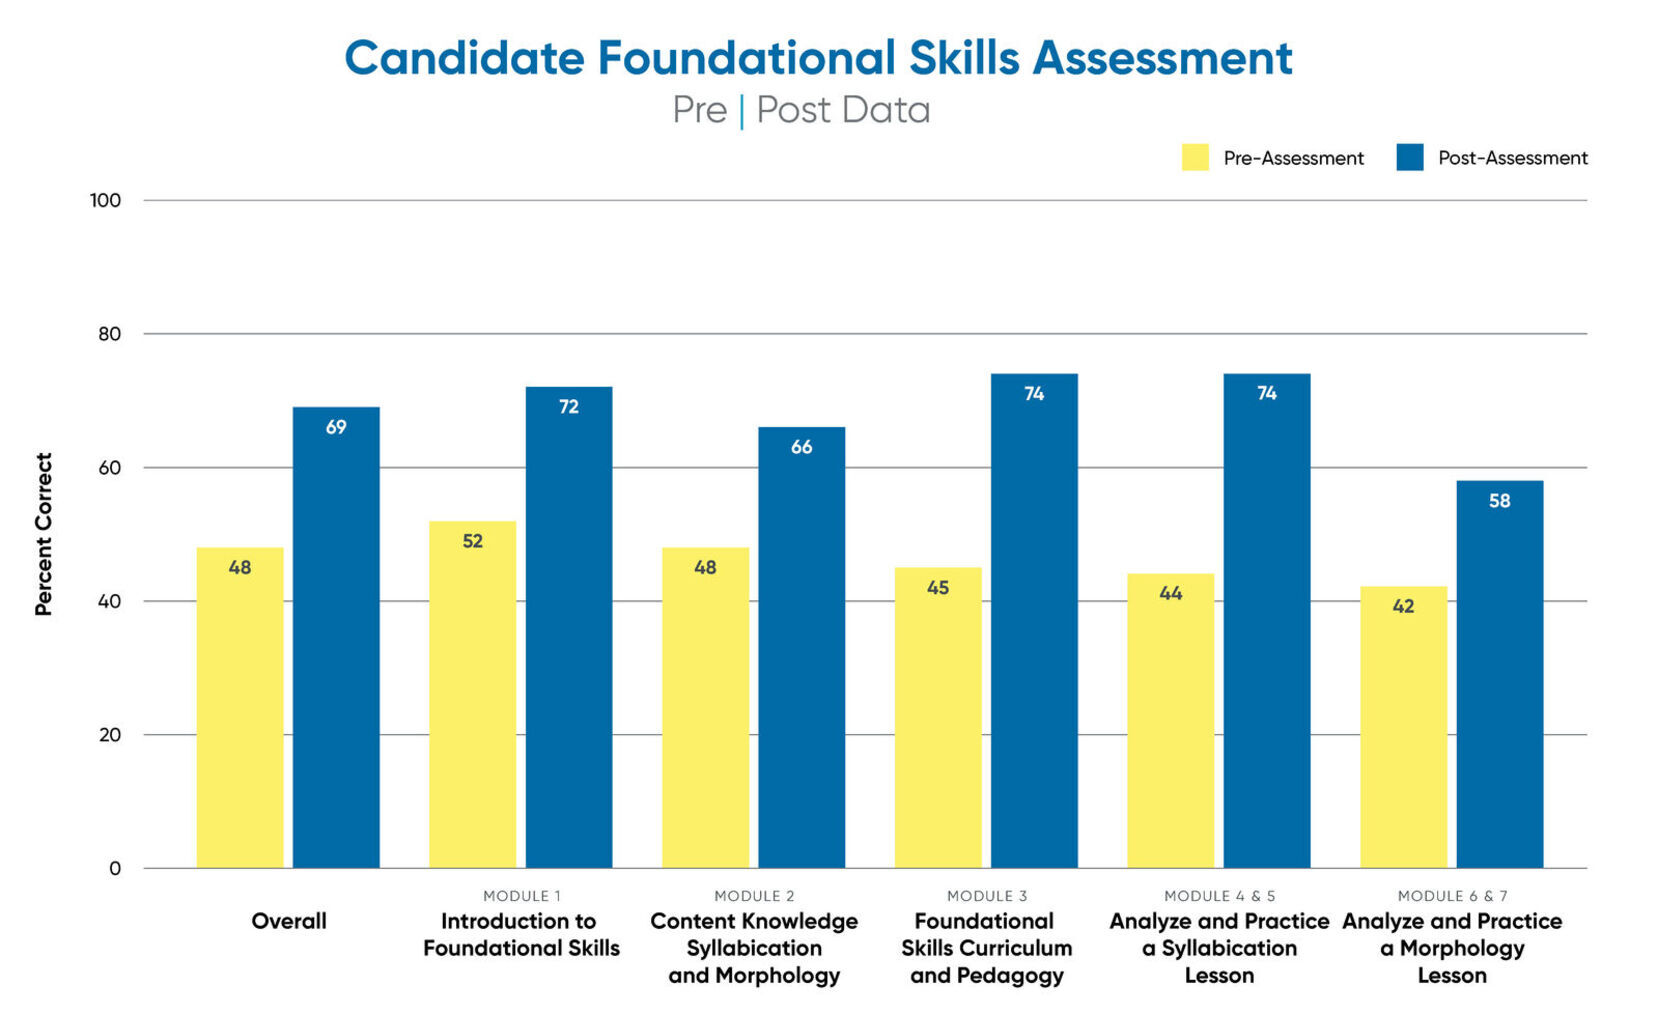 Bar graph displaying results from candidate pre/post assessments